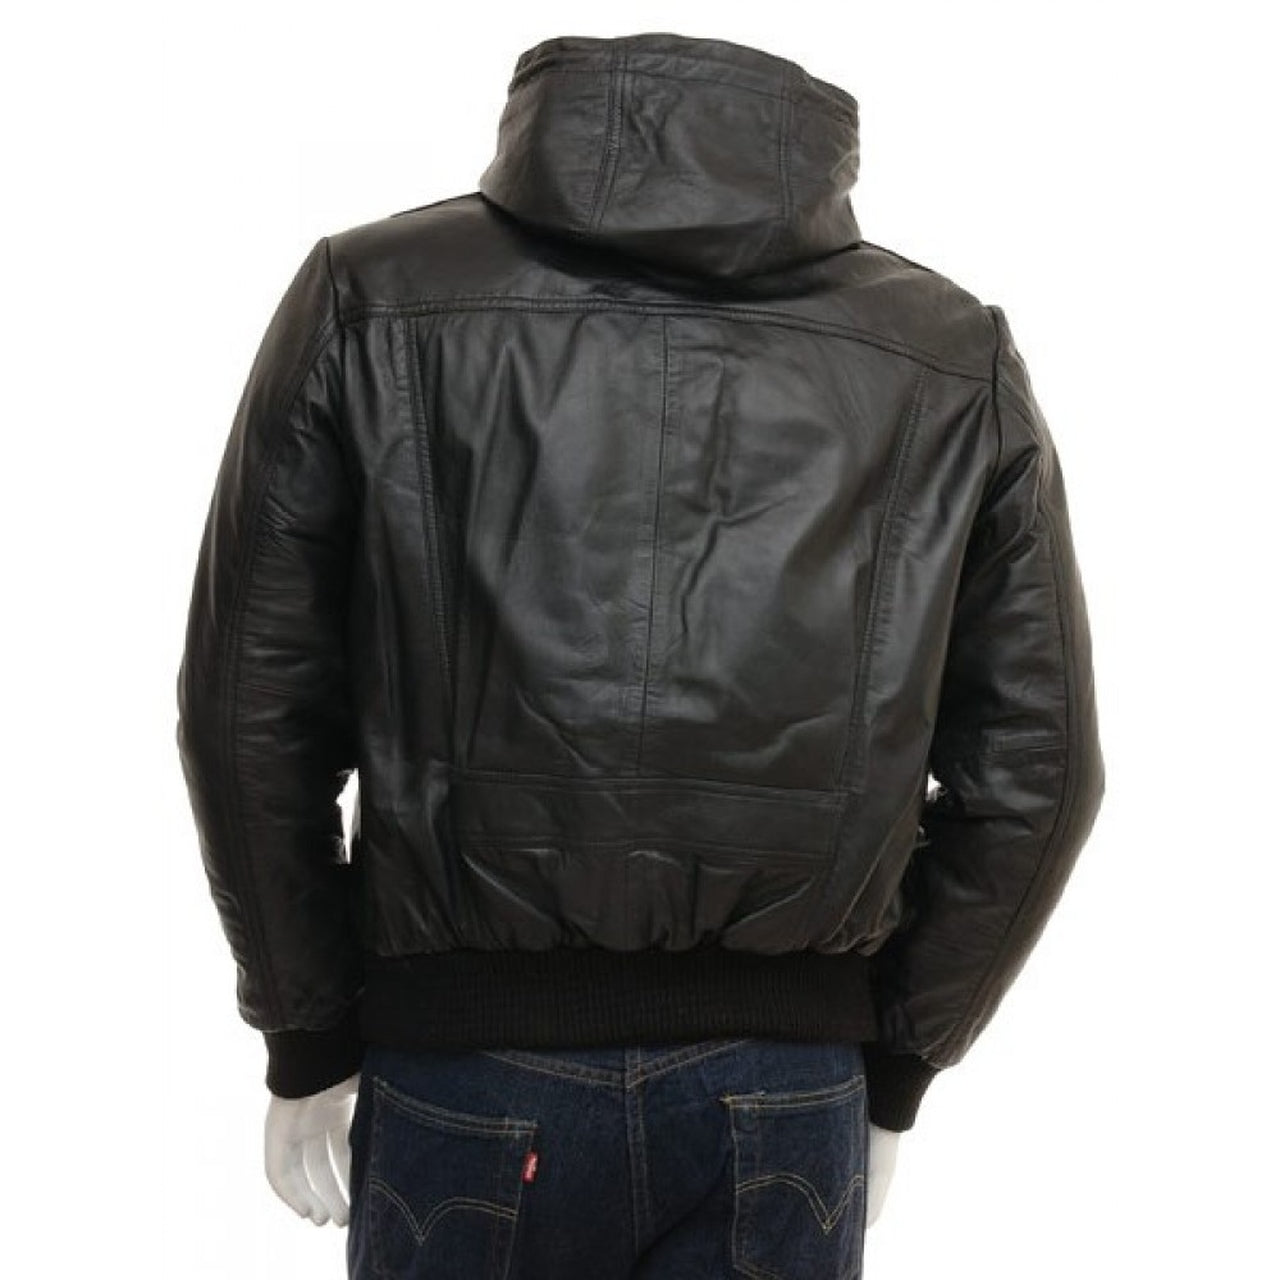 BlaCk casUal HooDed genUine LeathEr boMber JacKet 😊Price only